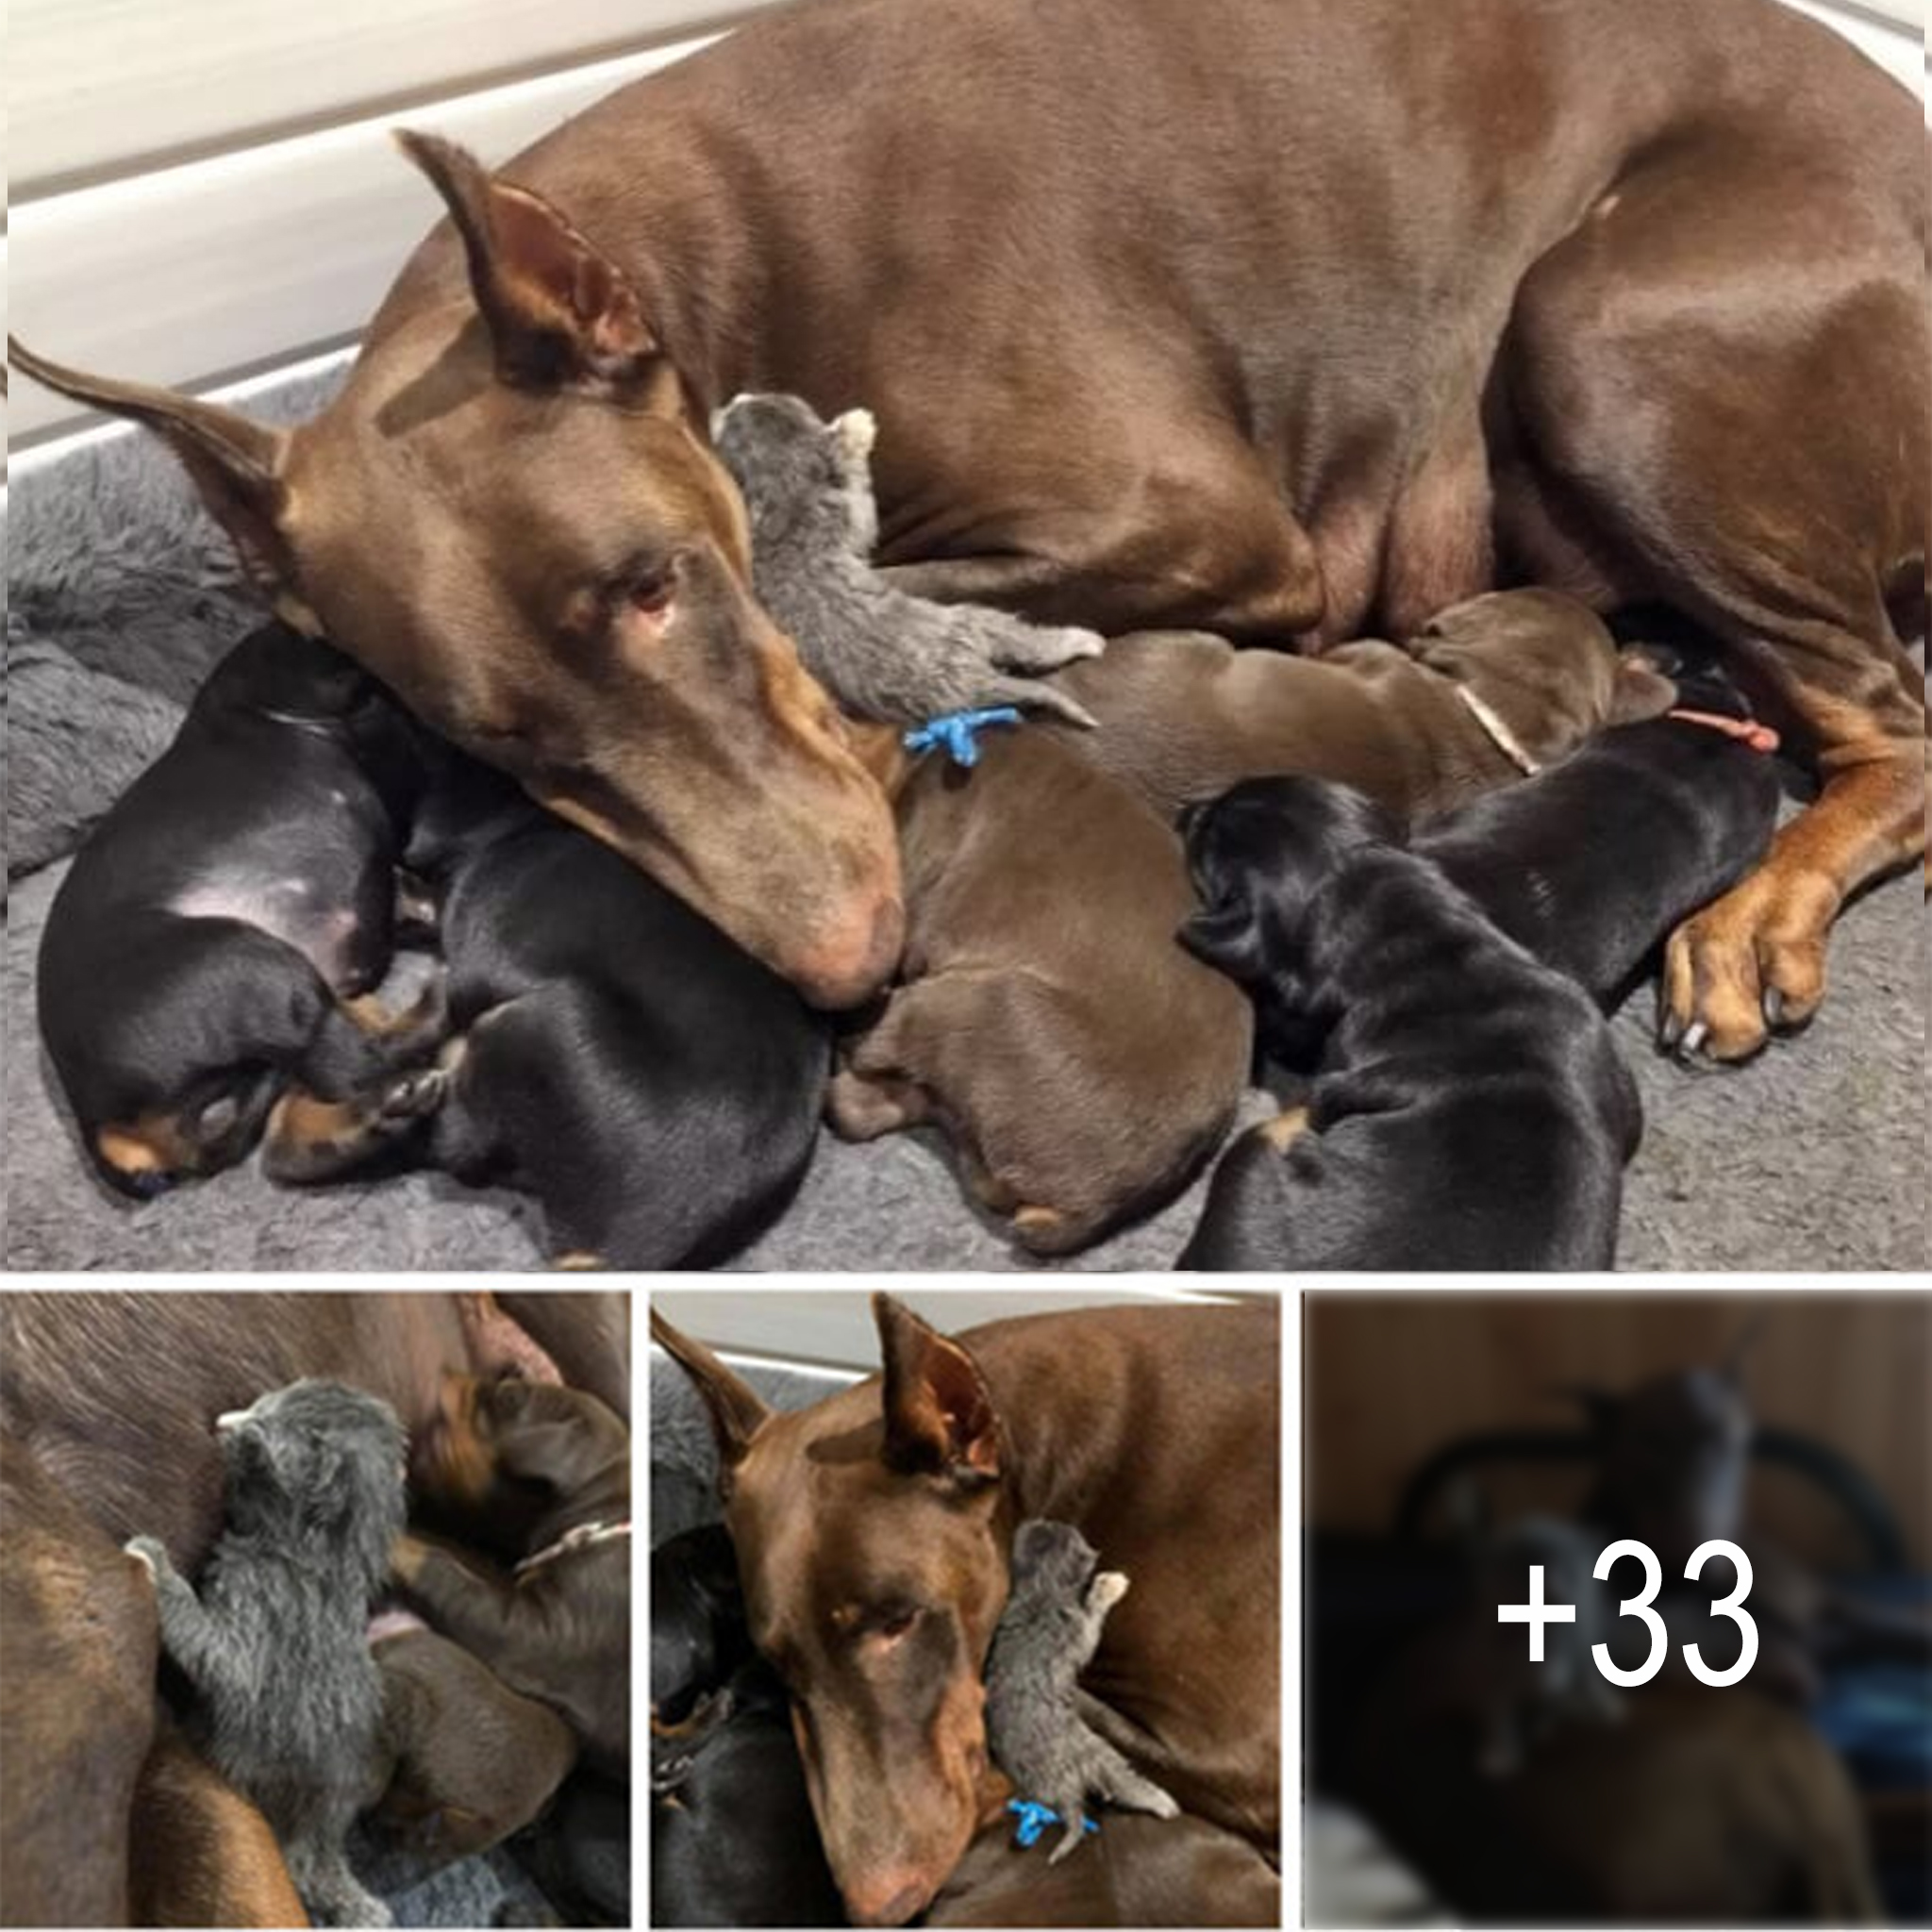 Unconventional Bonds: Doberman Dog Adopts Abandoned Kitten, Becomes Nurturing Mother to Both Puppies and Kitten – An Unlikely Love Story